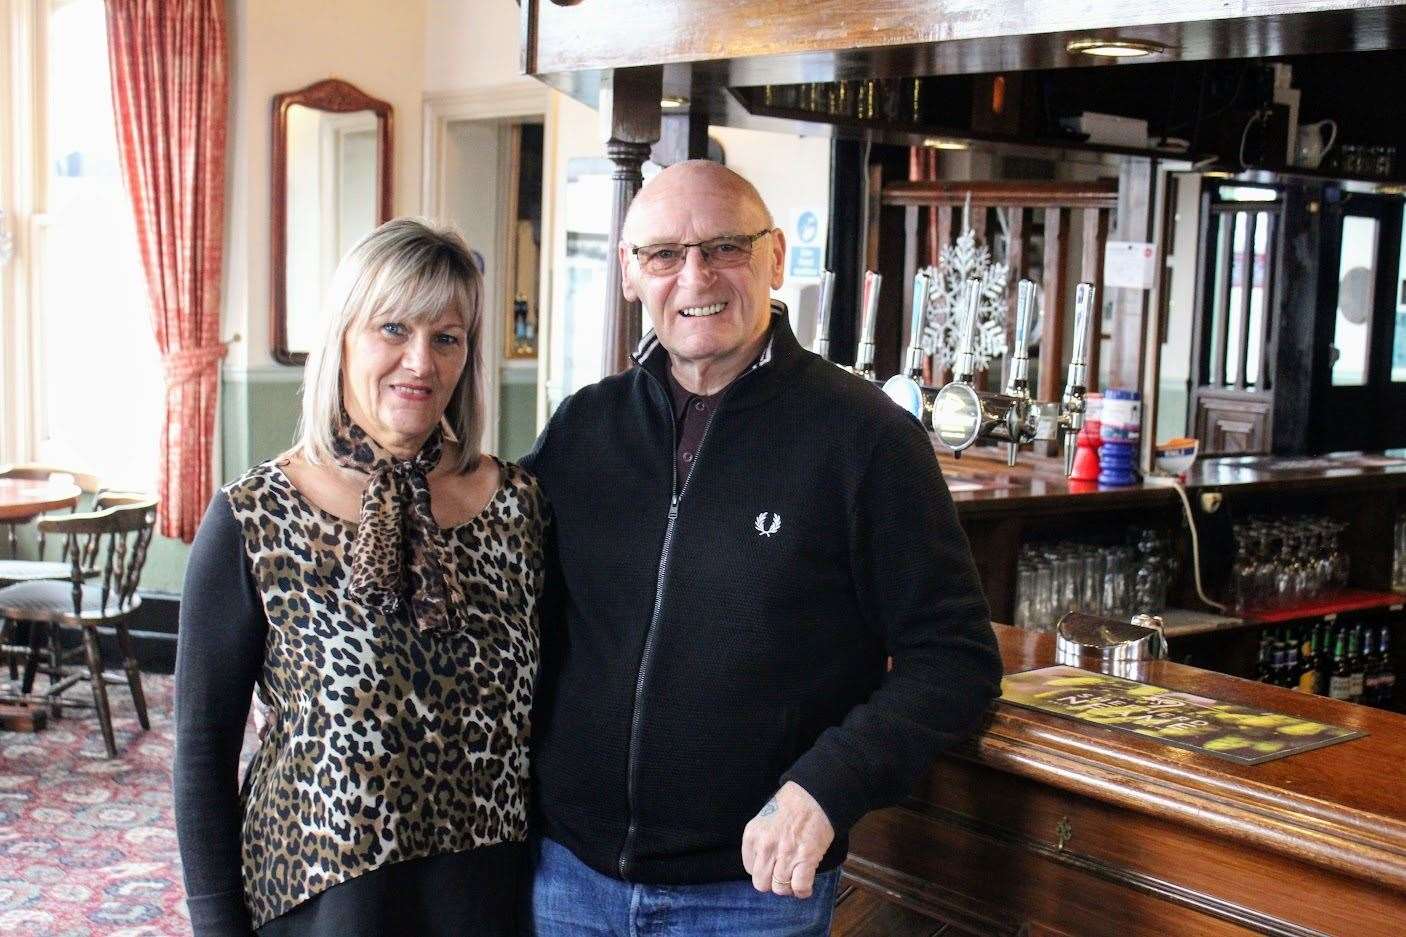 Sharon and Ray Summers are the new bosses at the Princess of Wales pub in Margate